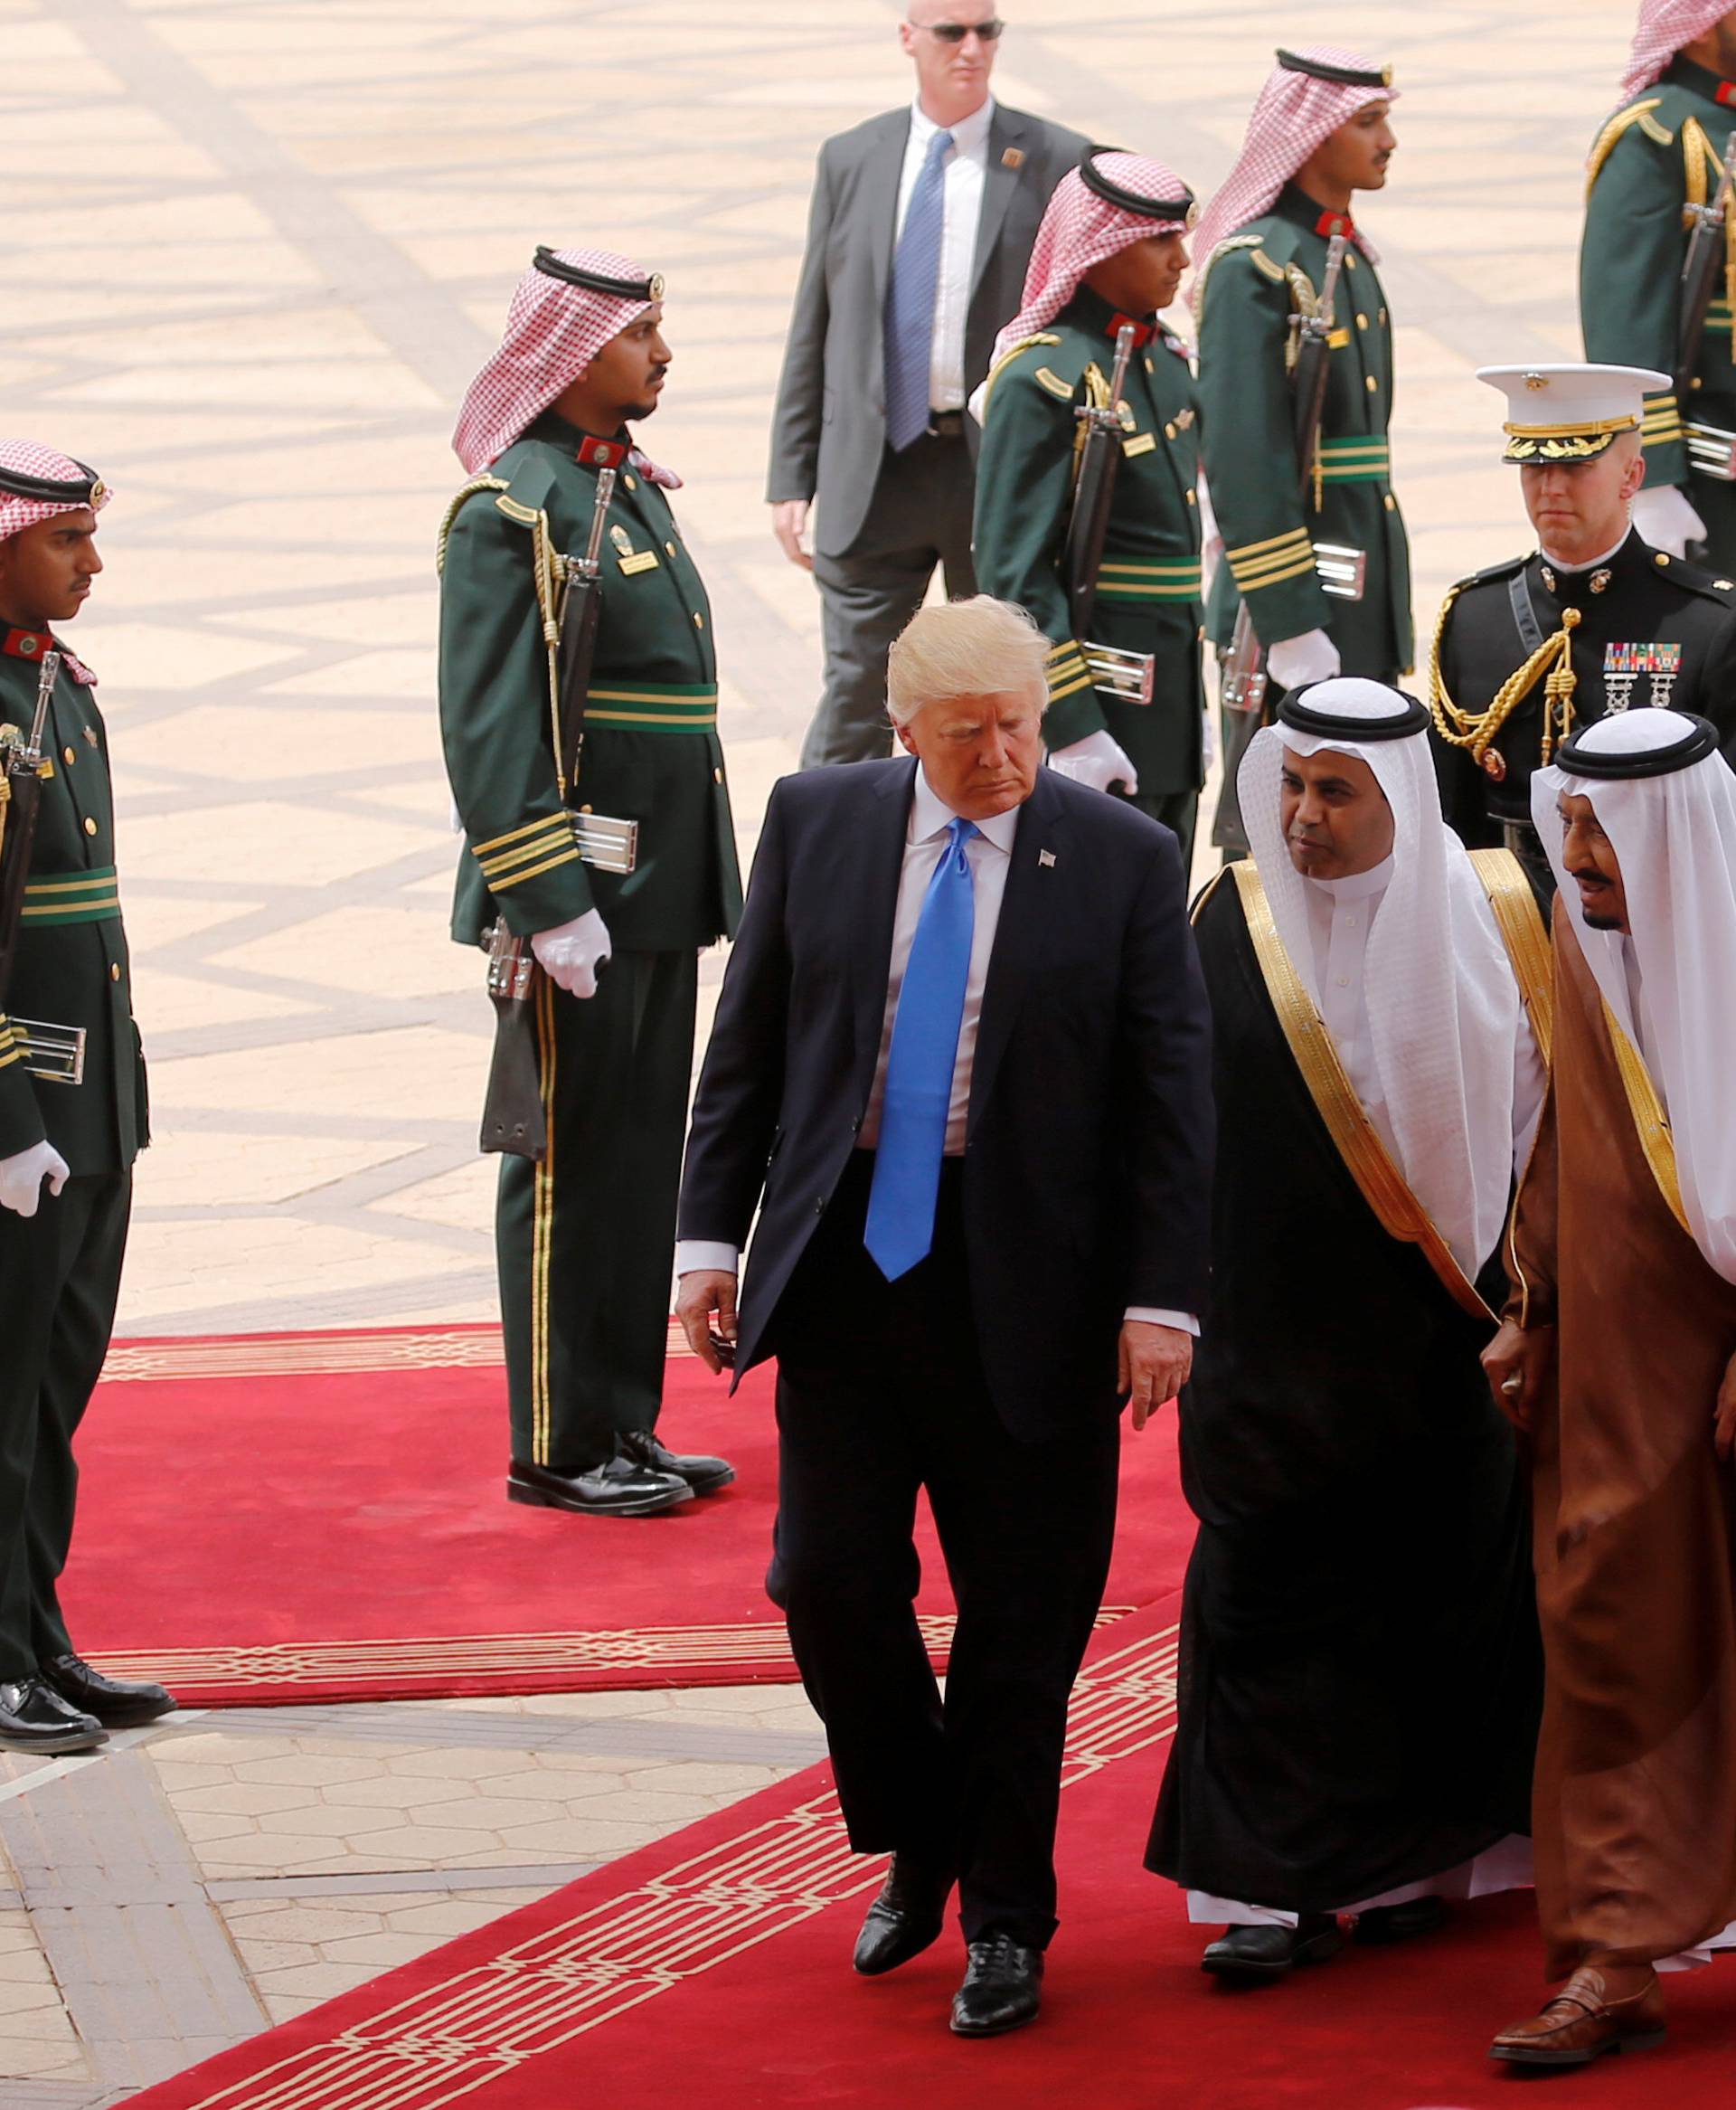 Saudi Arabia's King Salman welcomes Trump and the first lady as they arrive aboard Air Force One at King Khalid Airport in Riyadh